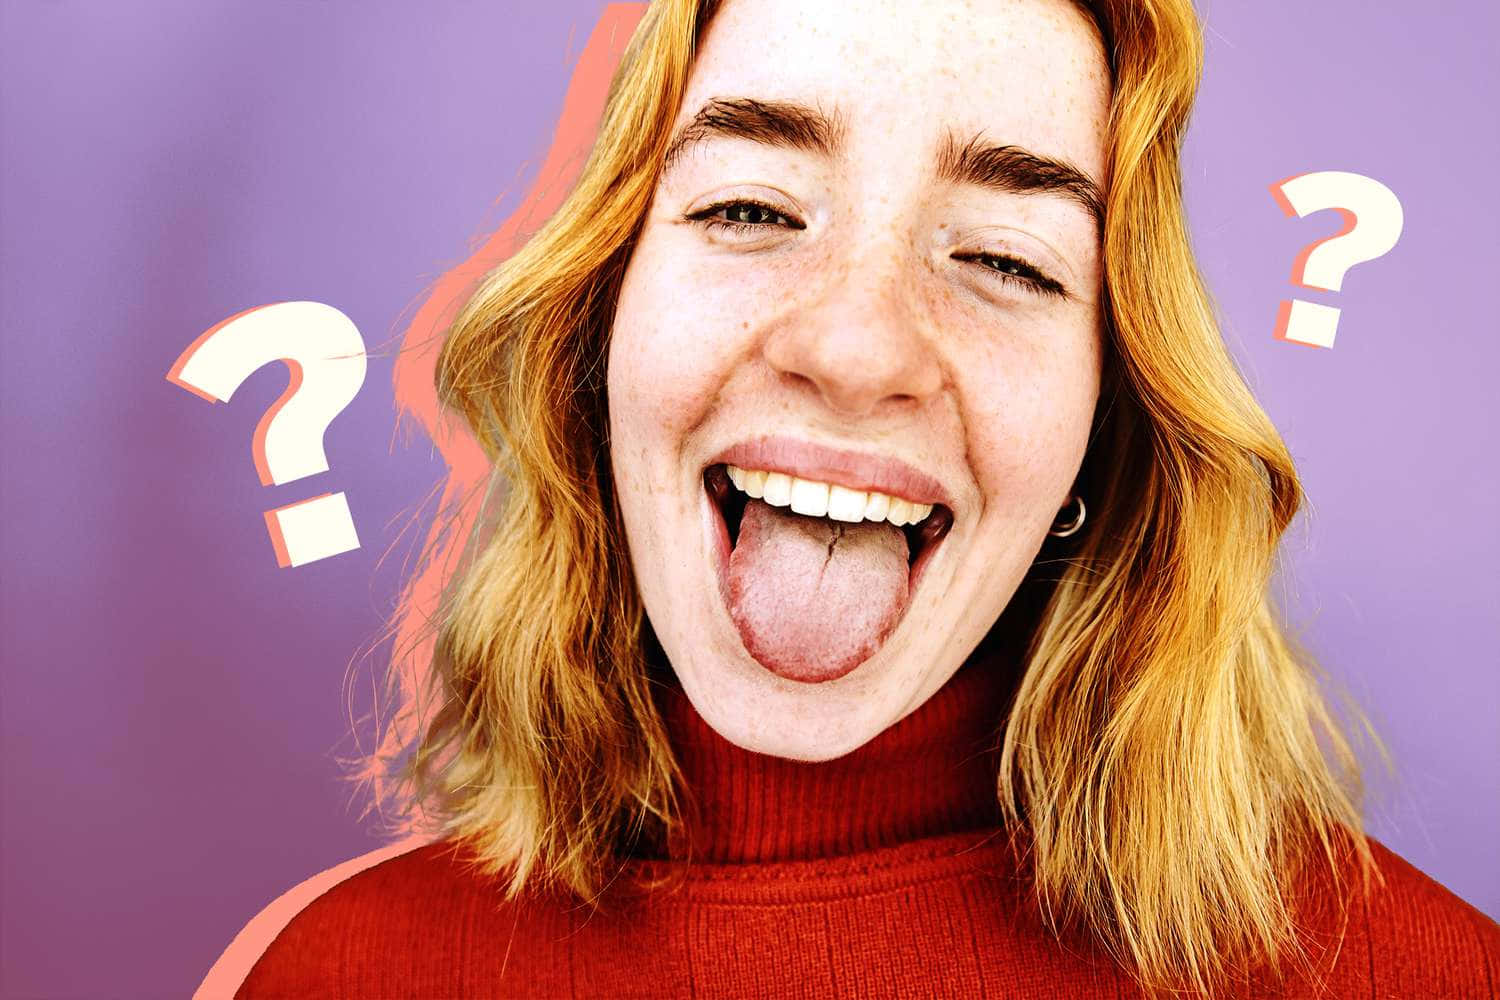 Girl Tongue Out Question Marks Wallpaper